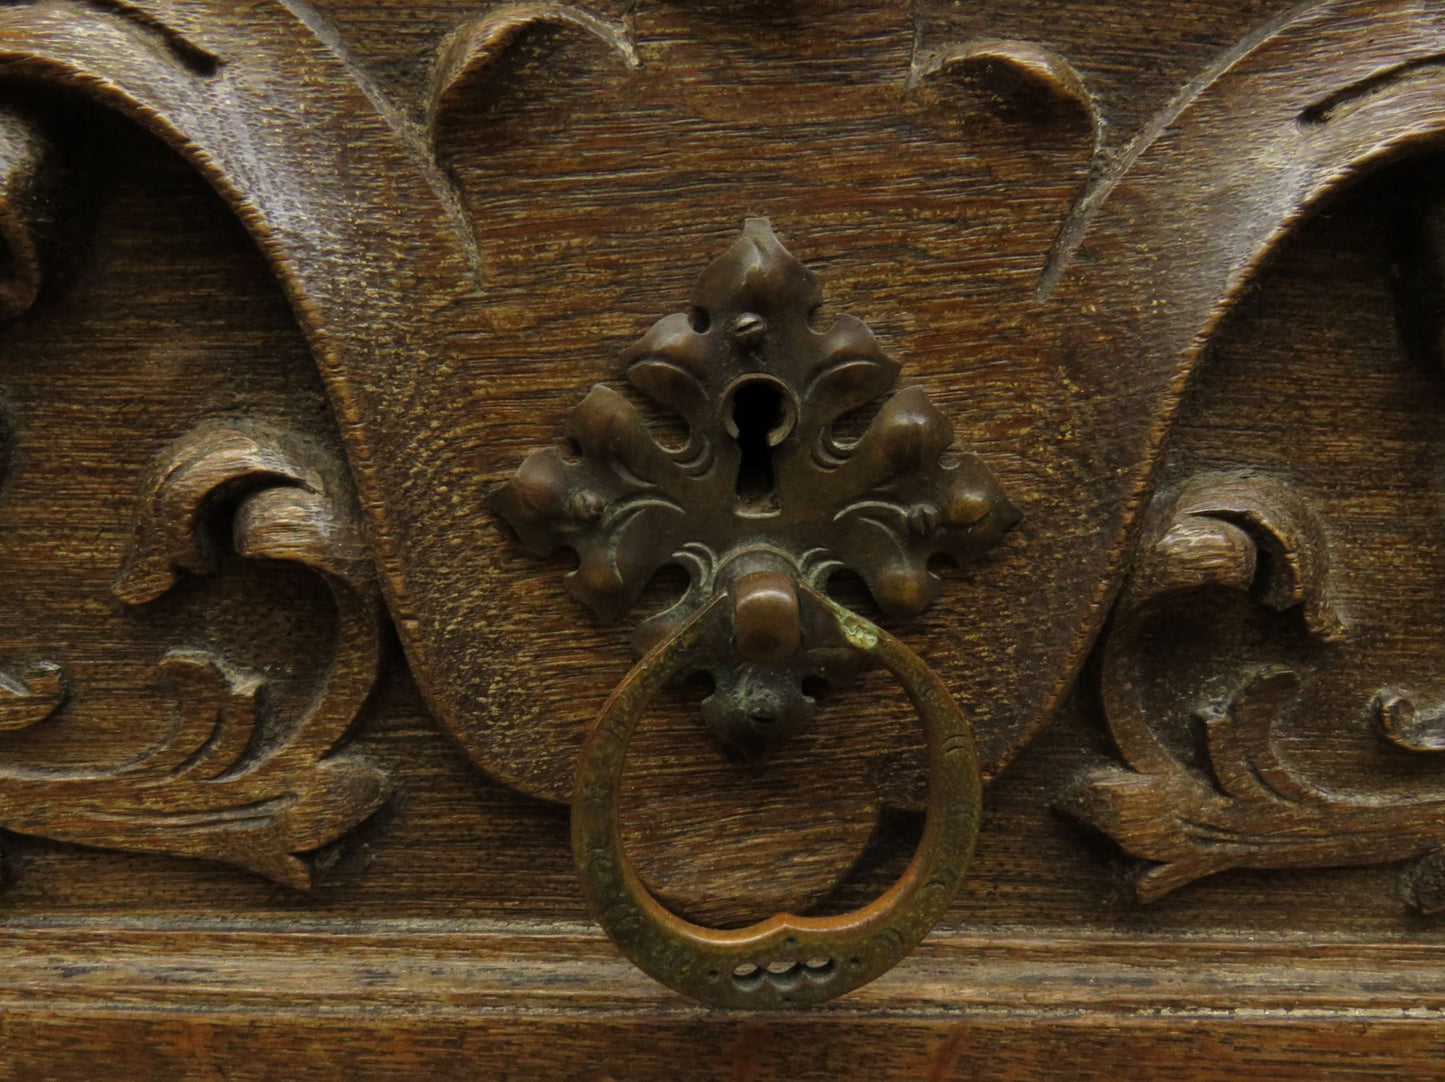 Carved German Linen Chest of Drawers with Fall Fronts, S.Kronthal & Sons